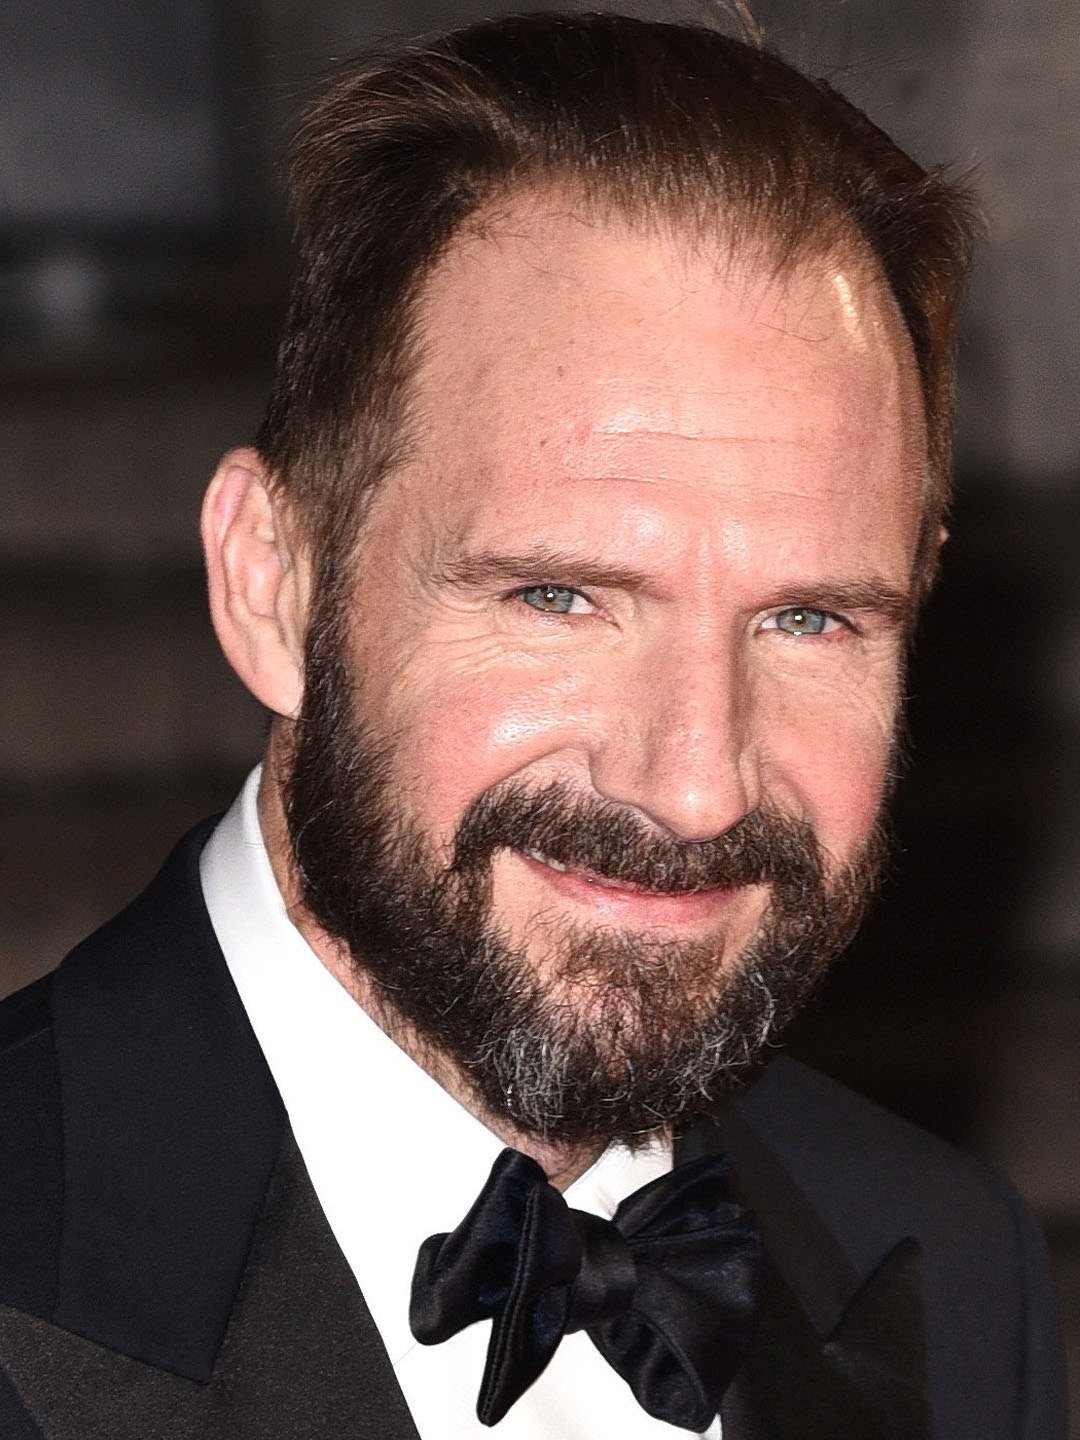 How tall is Ralph Fiennes?